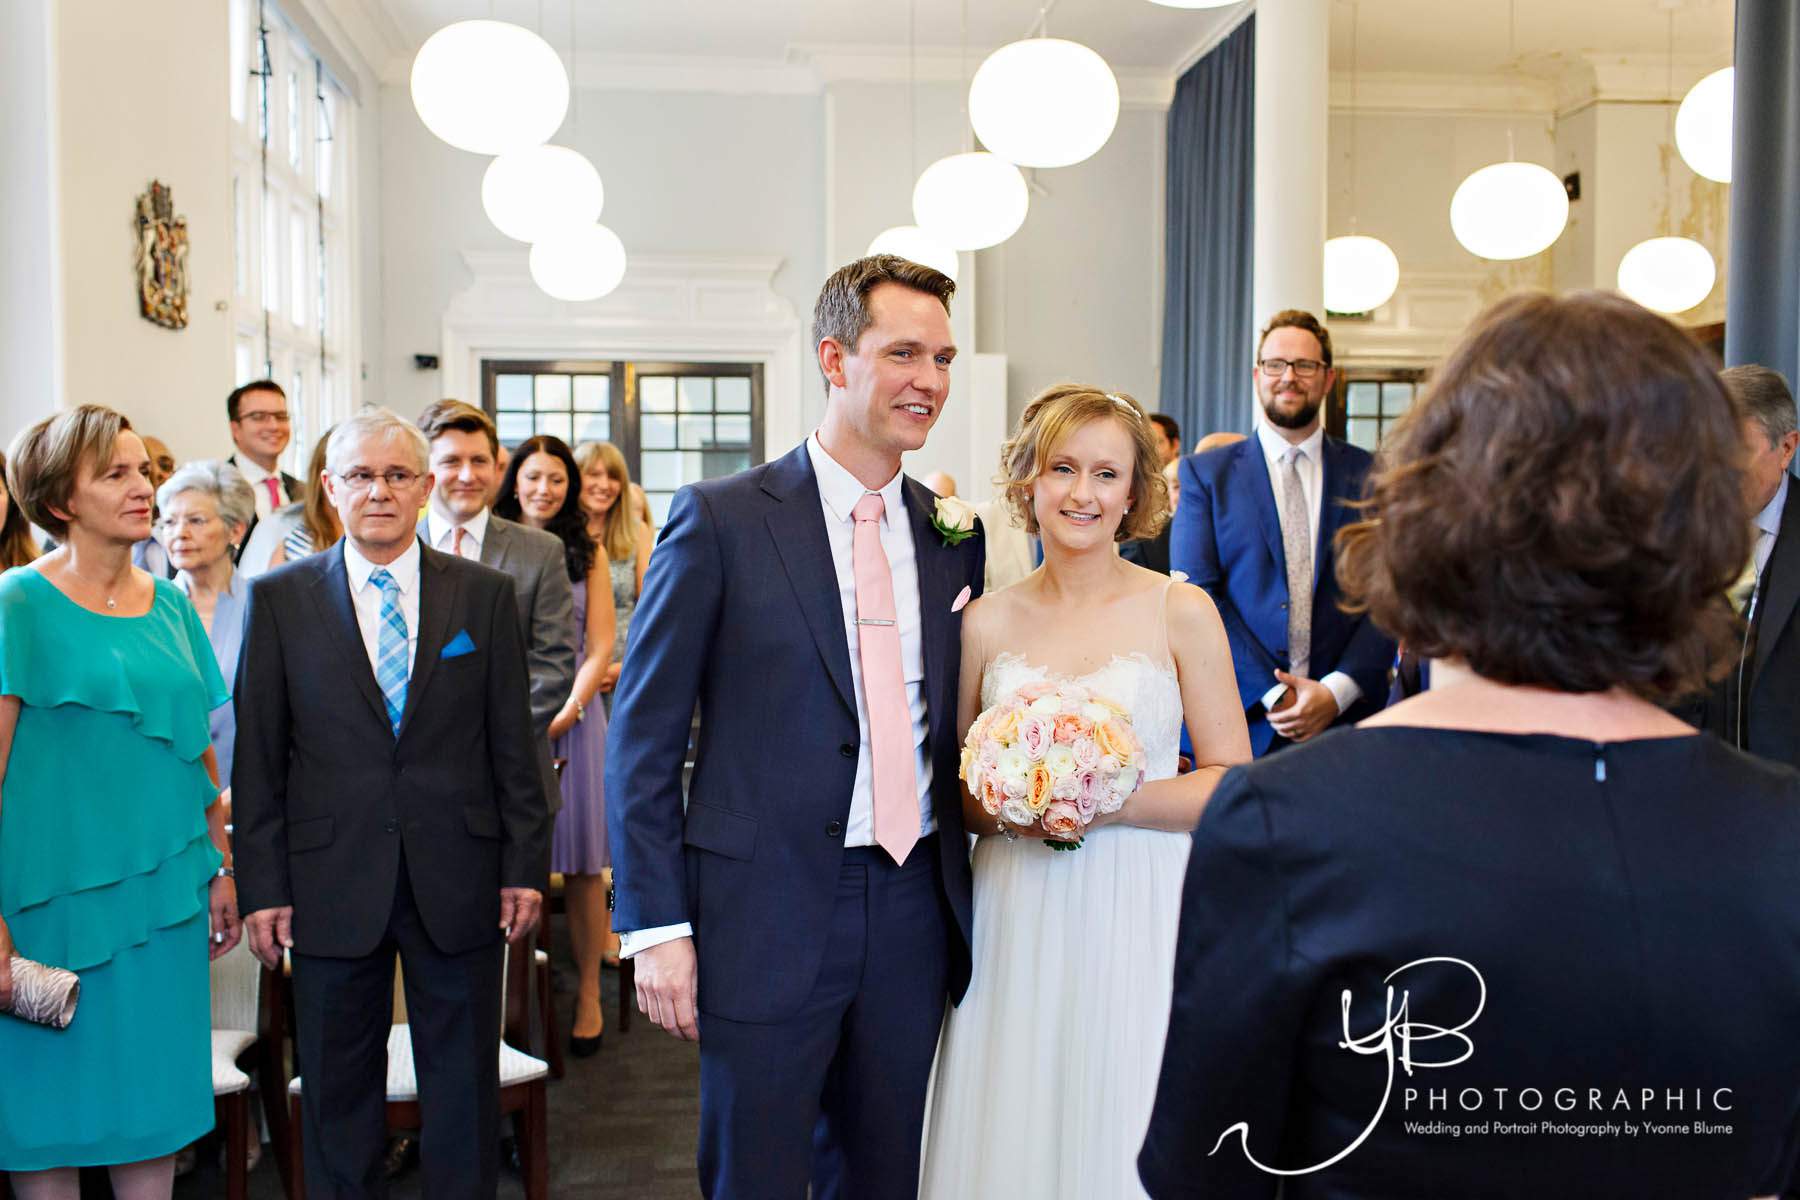 Wedding Ceremony in the Mayfair Room of Mayfair Libraray